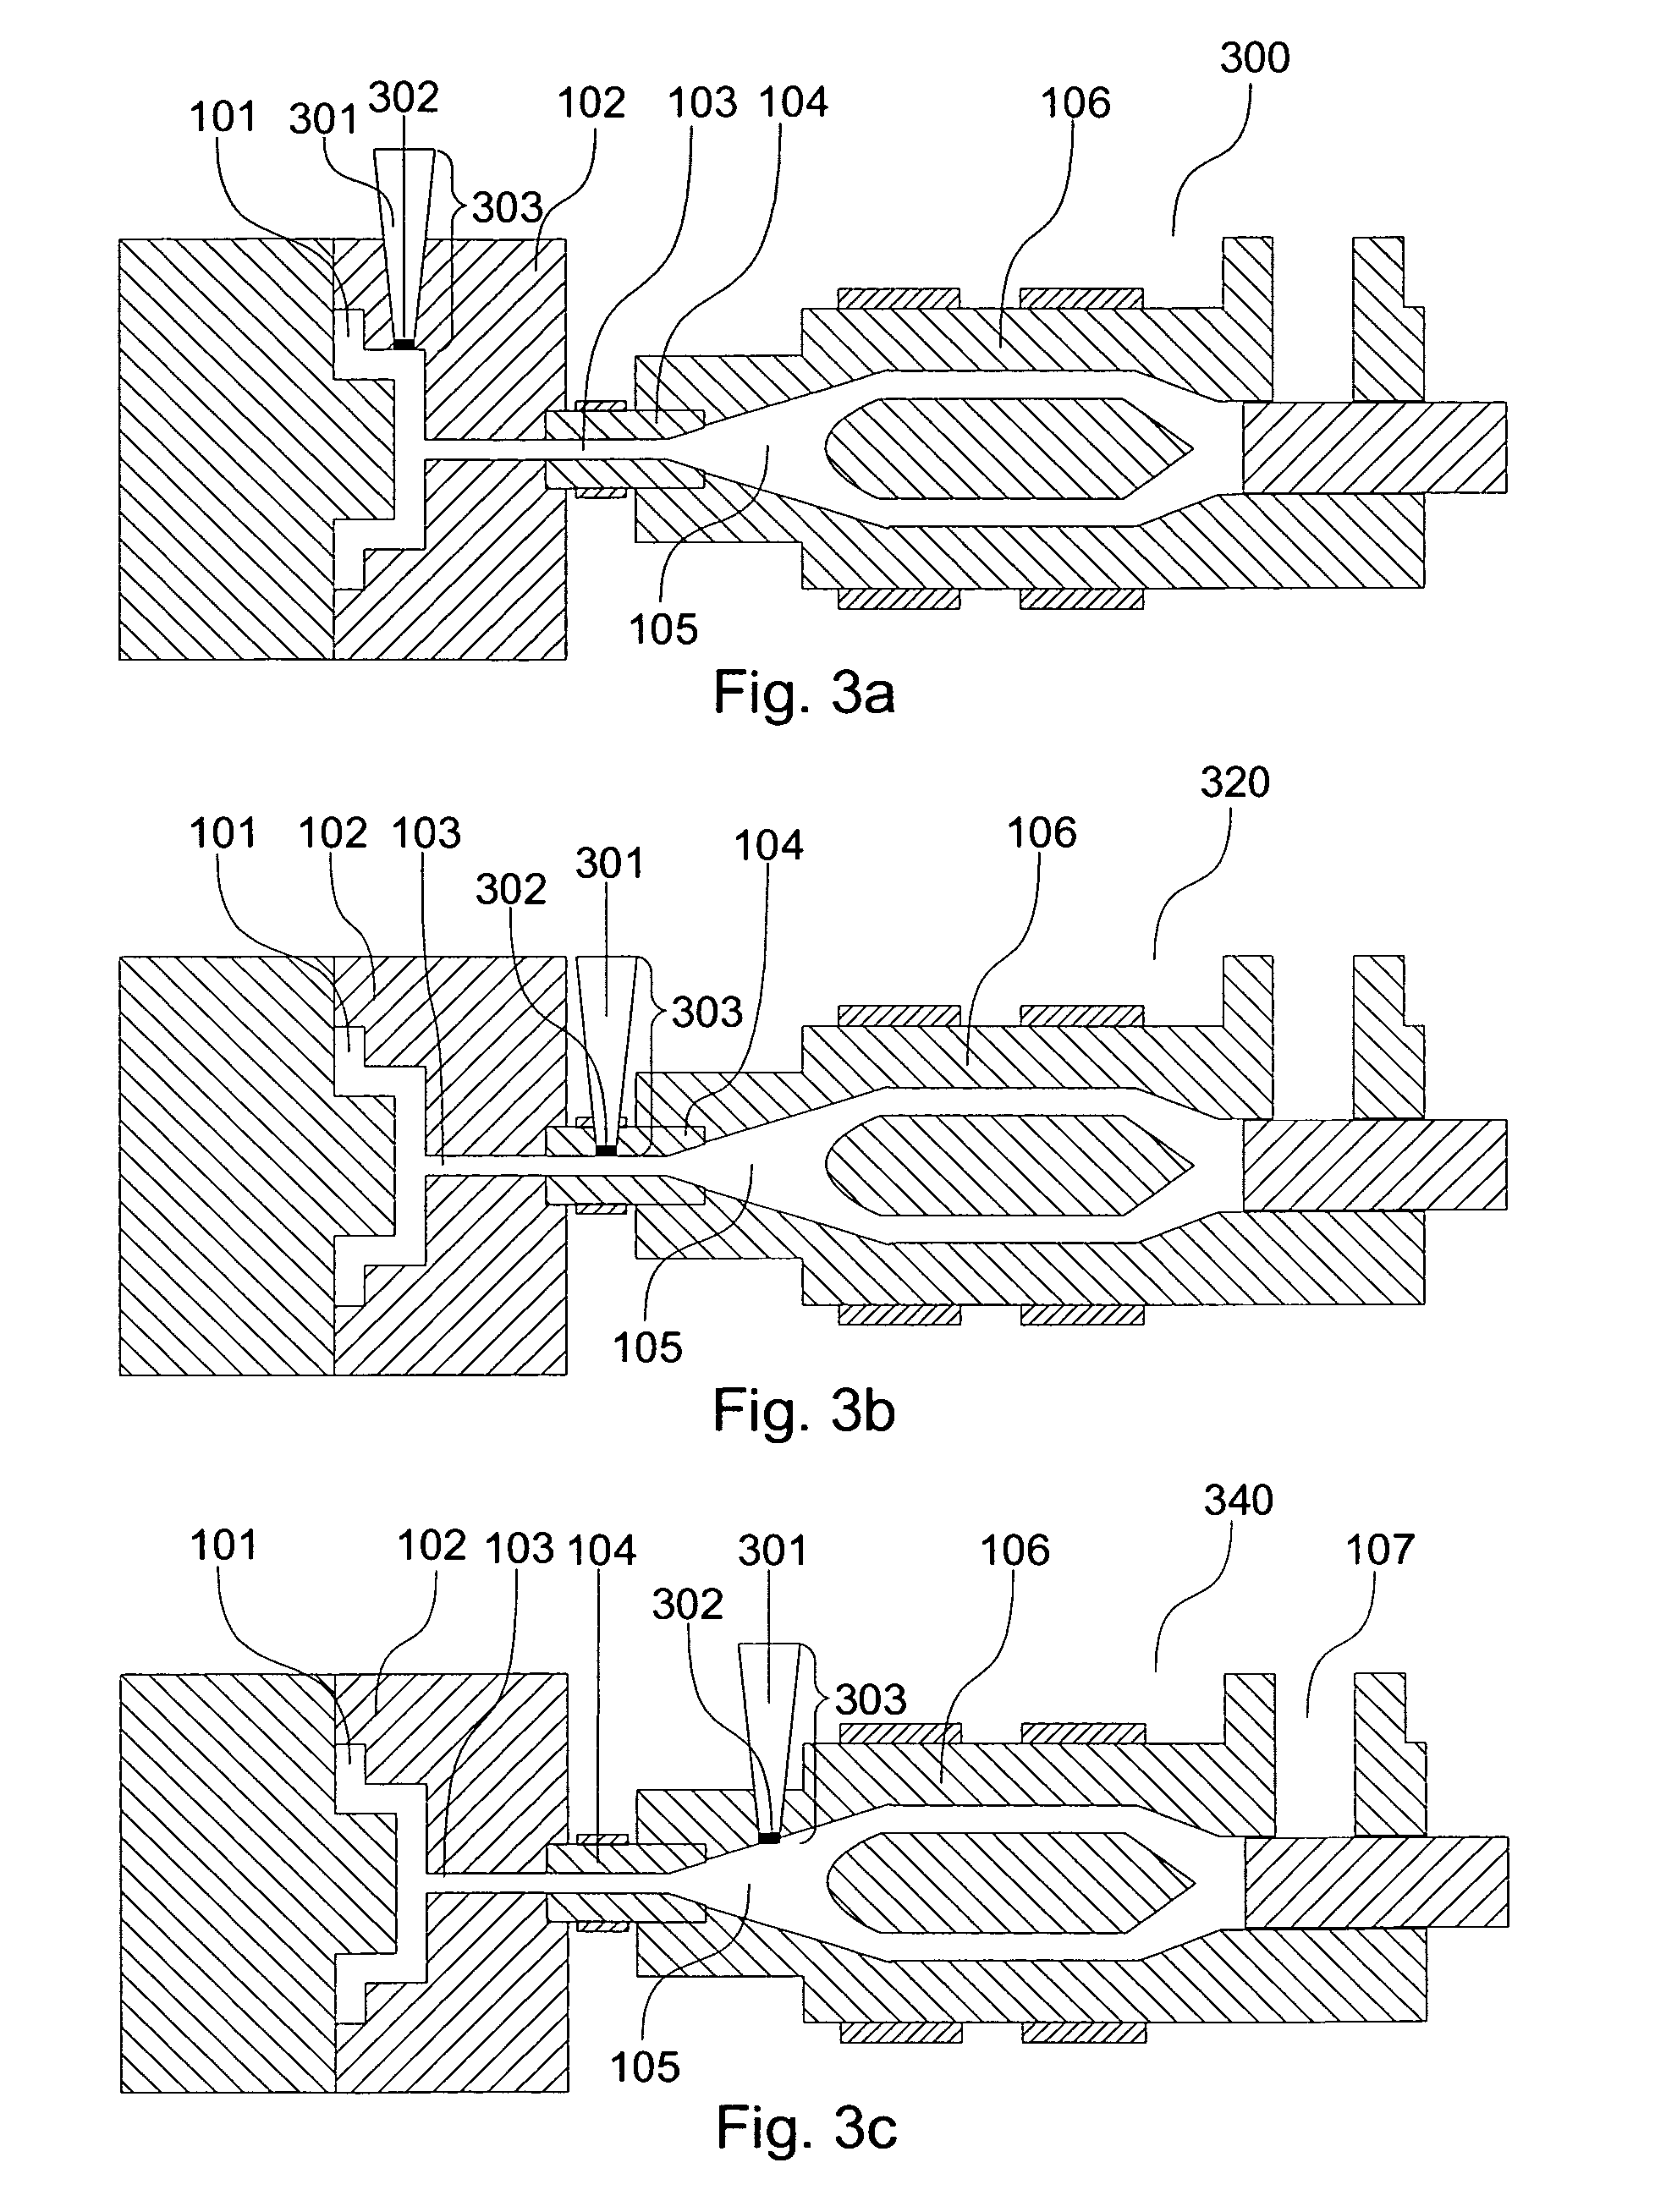 Method and apparatus for forming plastics with integral RFID devices